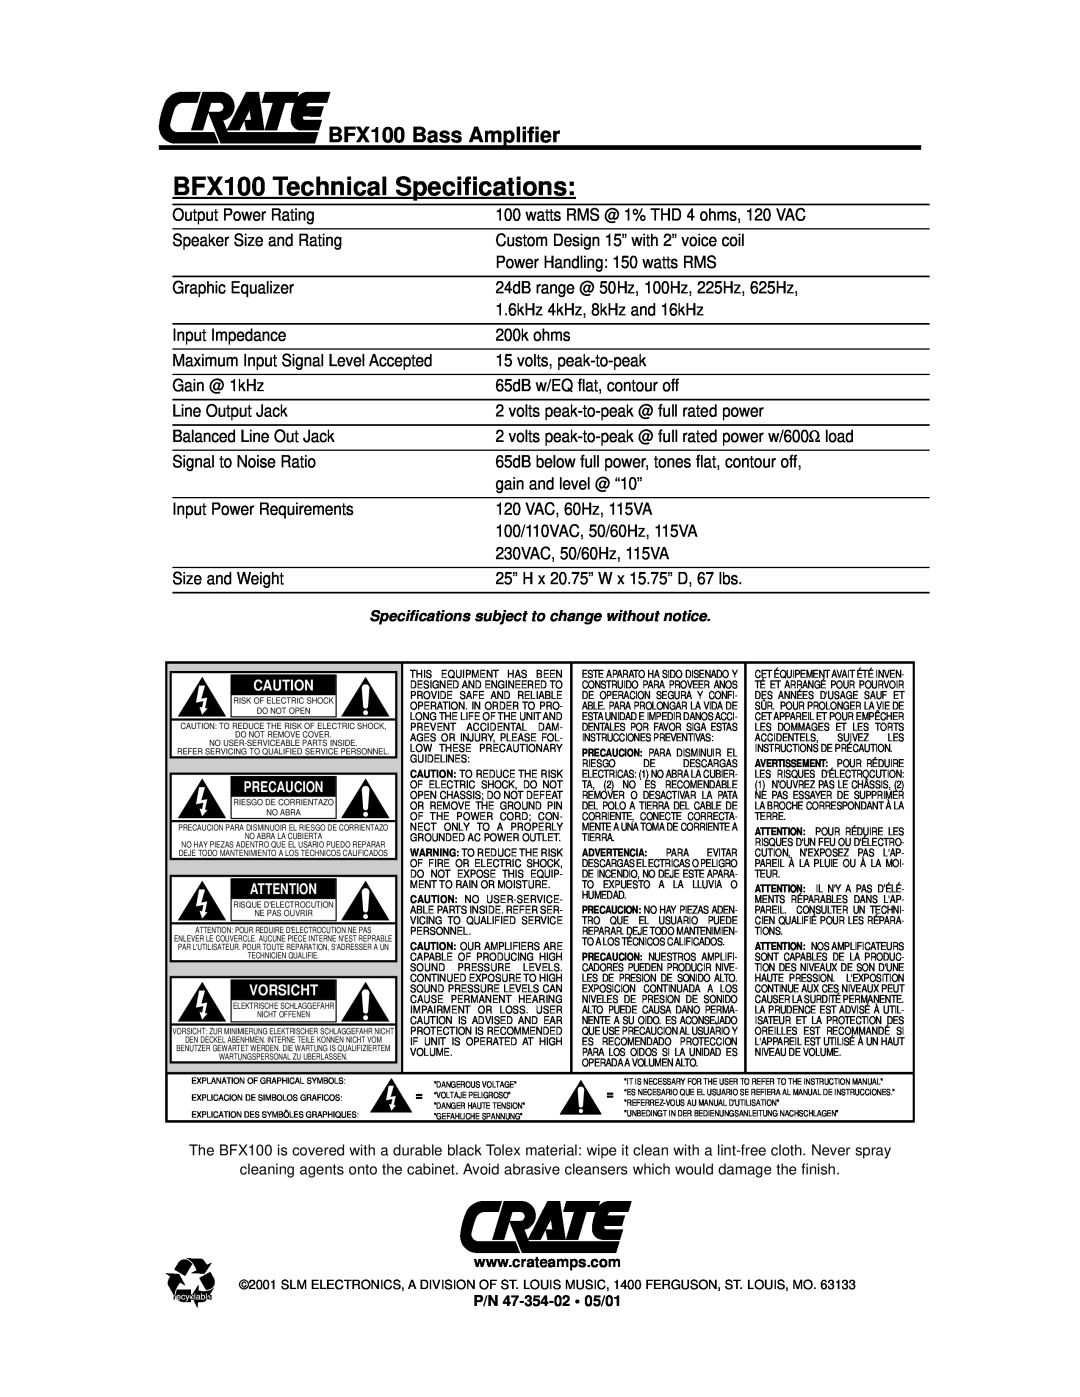 Crate Amplifiers owner manual BFX100 Technical Specifications, BFX100 Bass Amplifier 